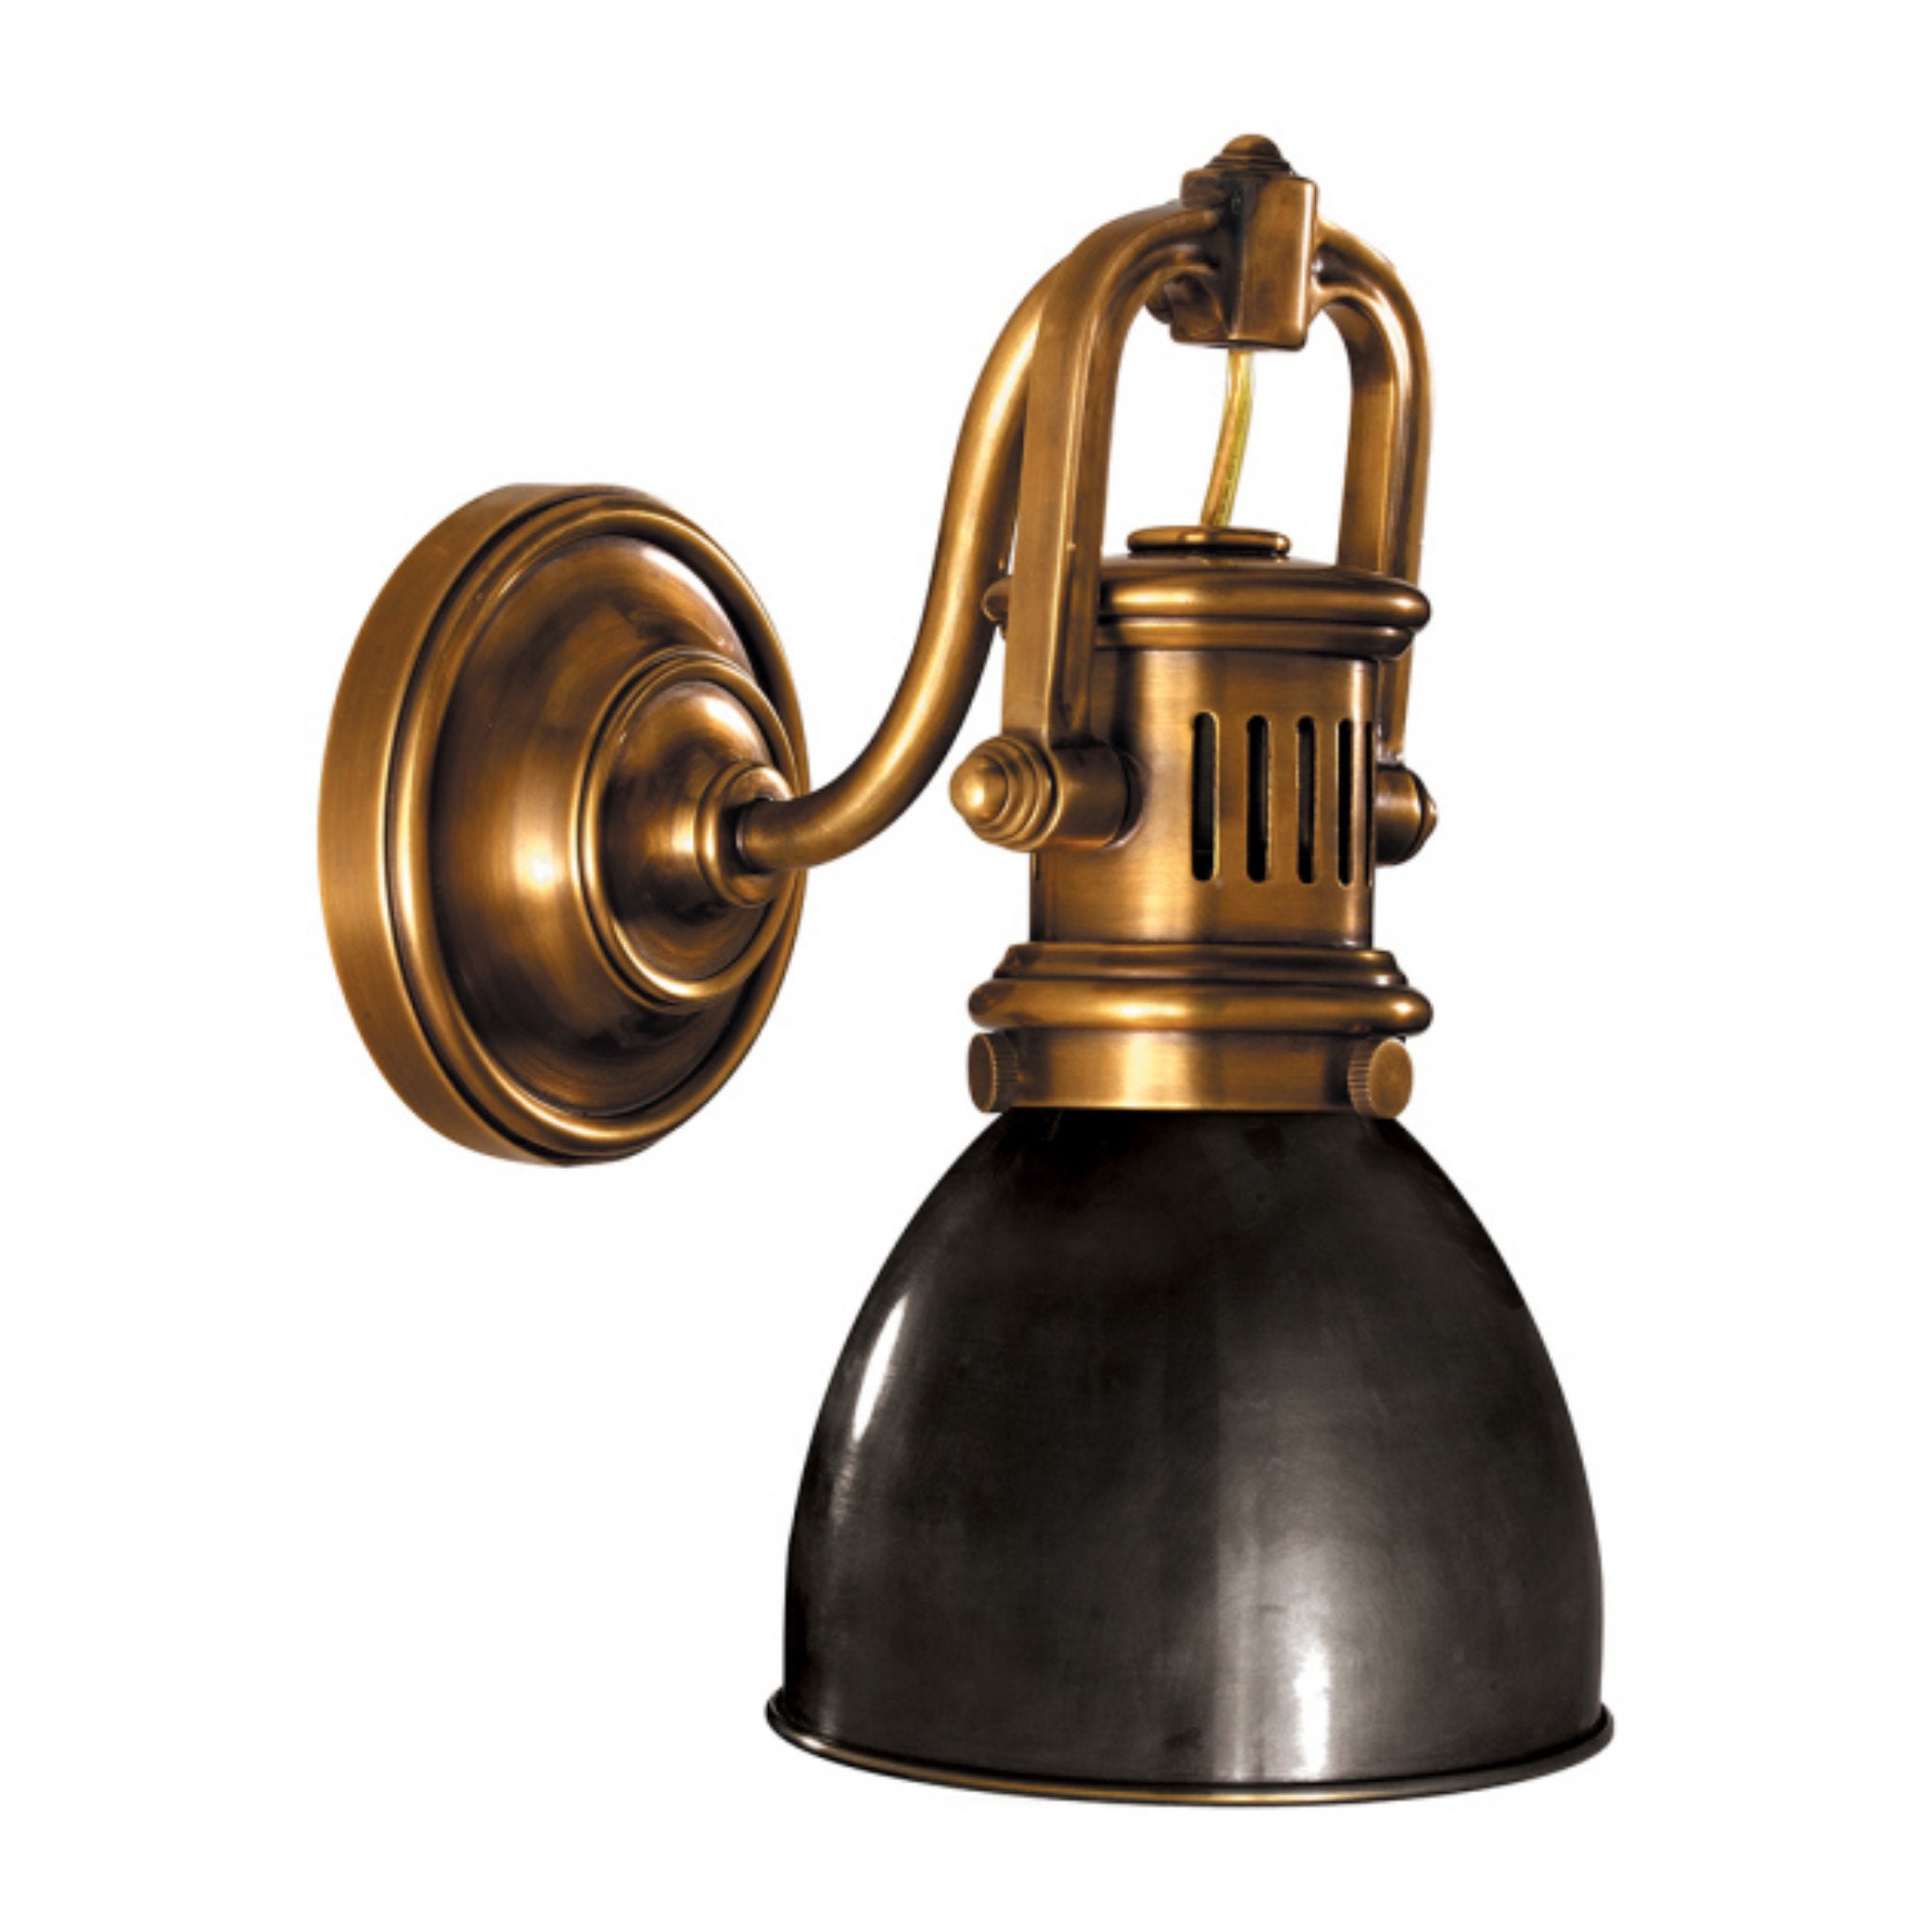 Chapman & Myers Yoke Suspended Sconce in Hand-Rubbed Antique Brass with Bronze Shade